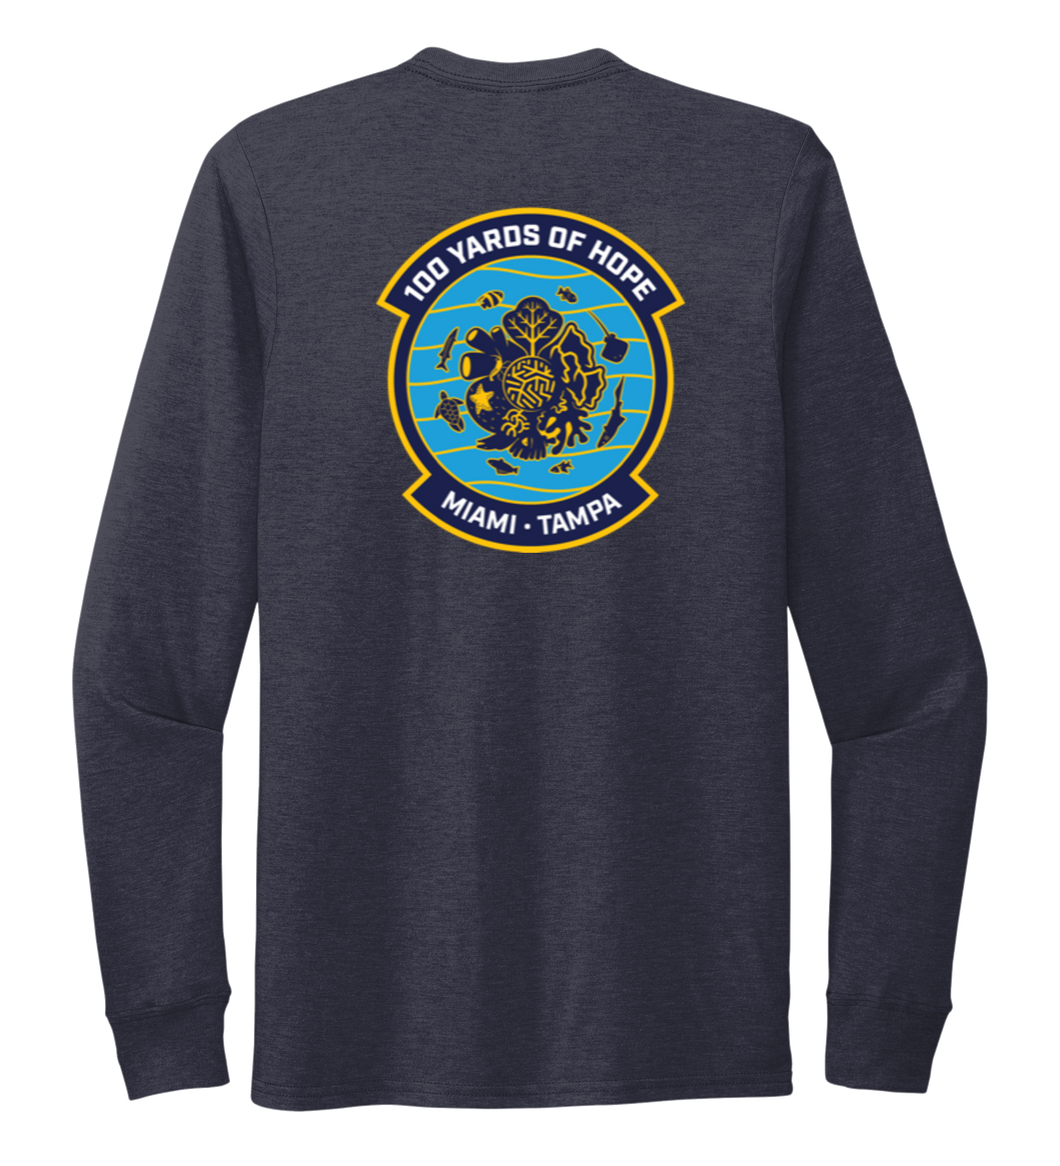 FORCE BLUE 100 YARDS OF HOPE Unisex Crew Neck Long Sleeve T-shirt in Deep Sea Blue